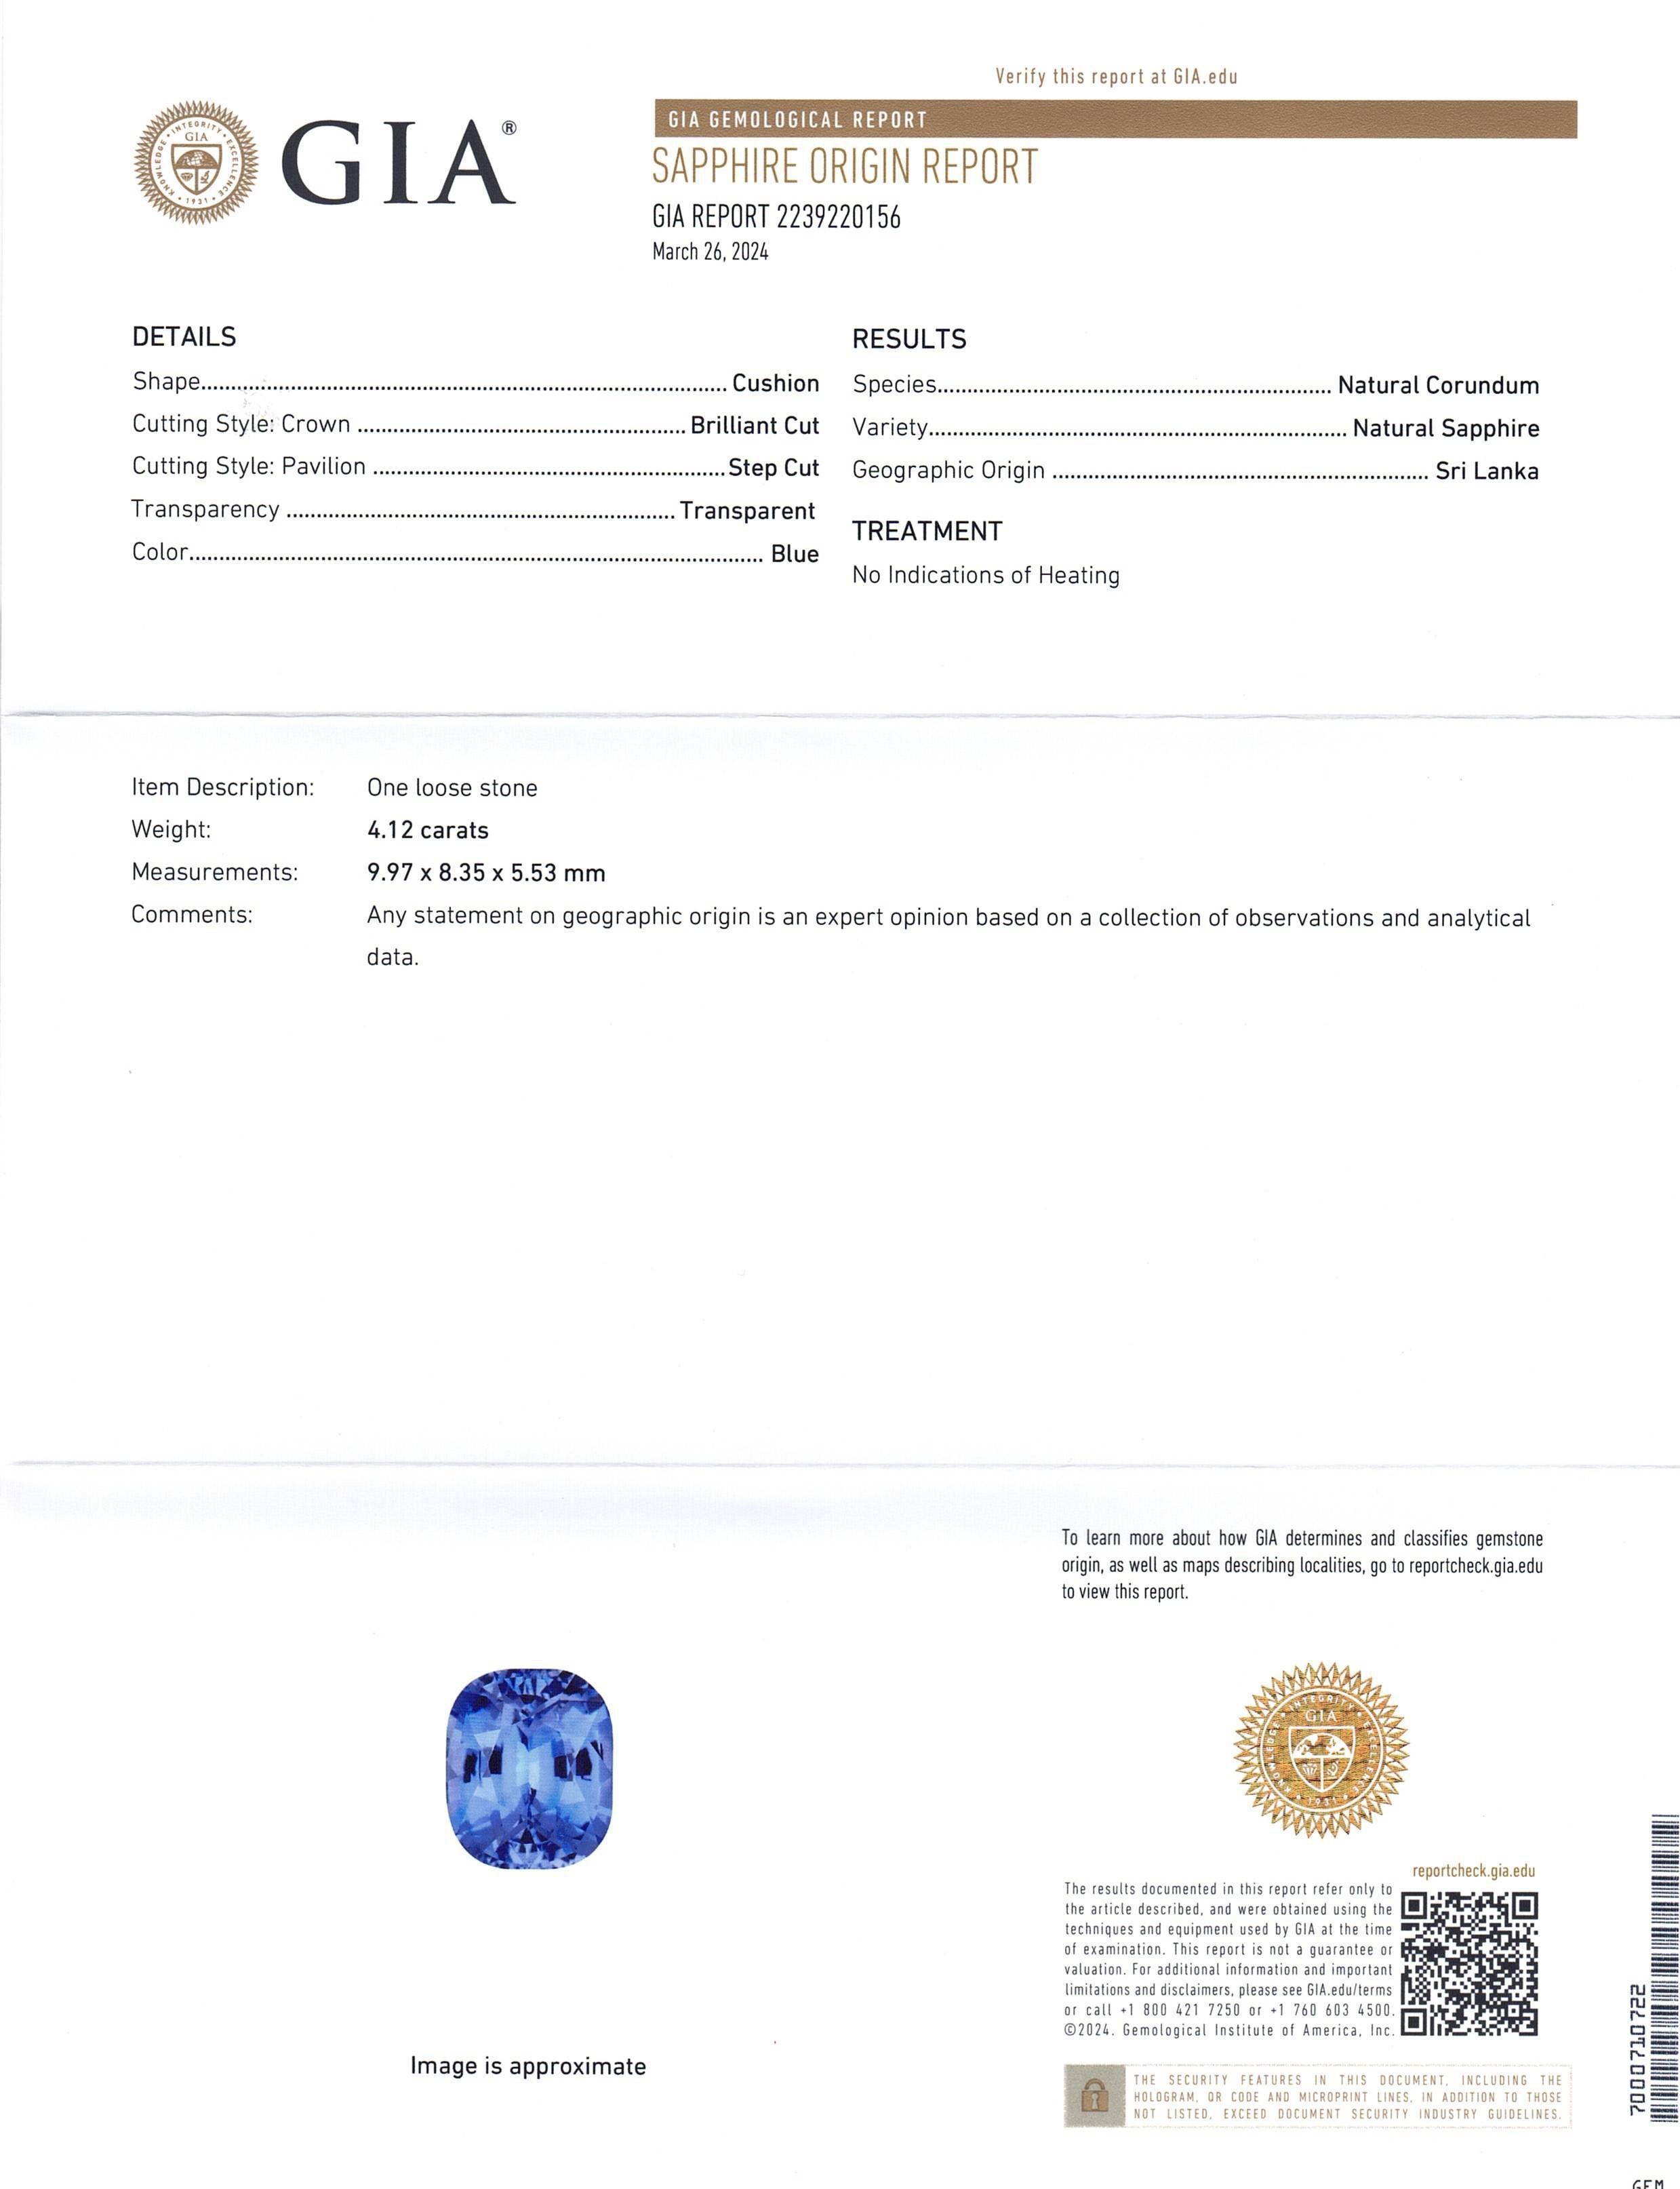 This is a stunning GIA Certified Sapphire 


The GIA report reads as follows:

GIA Report Number: 2239220156
Shape: Cushion
Cutting Style: 
Cutting Style: Crown: Brilliant Cut
Cutting Style: Pavilion: Step Cut
Transparency: Transparent
Colour: